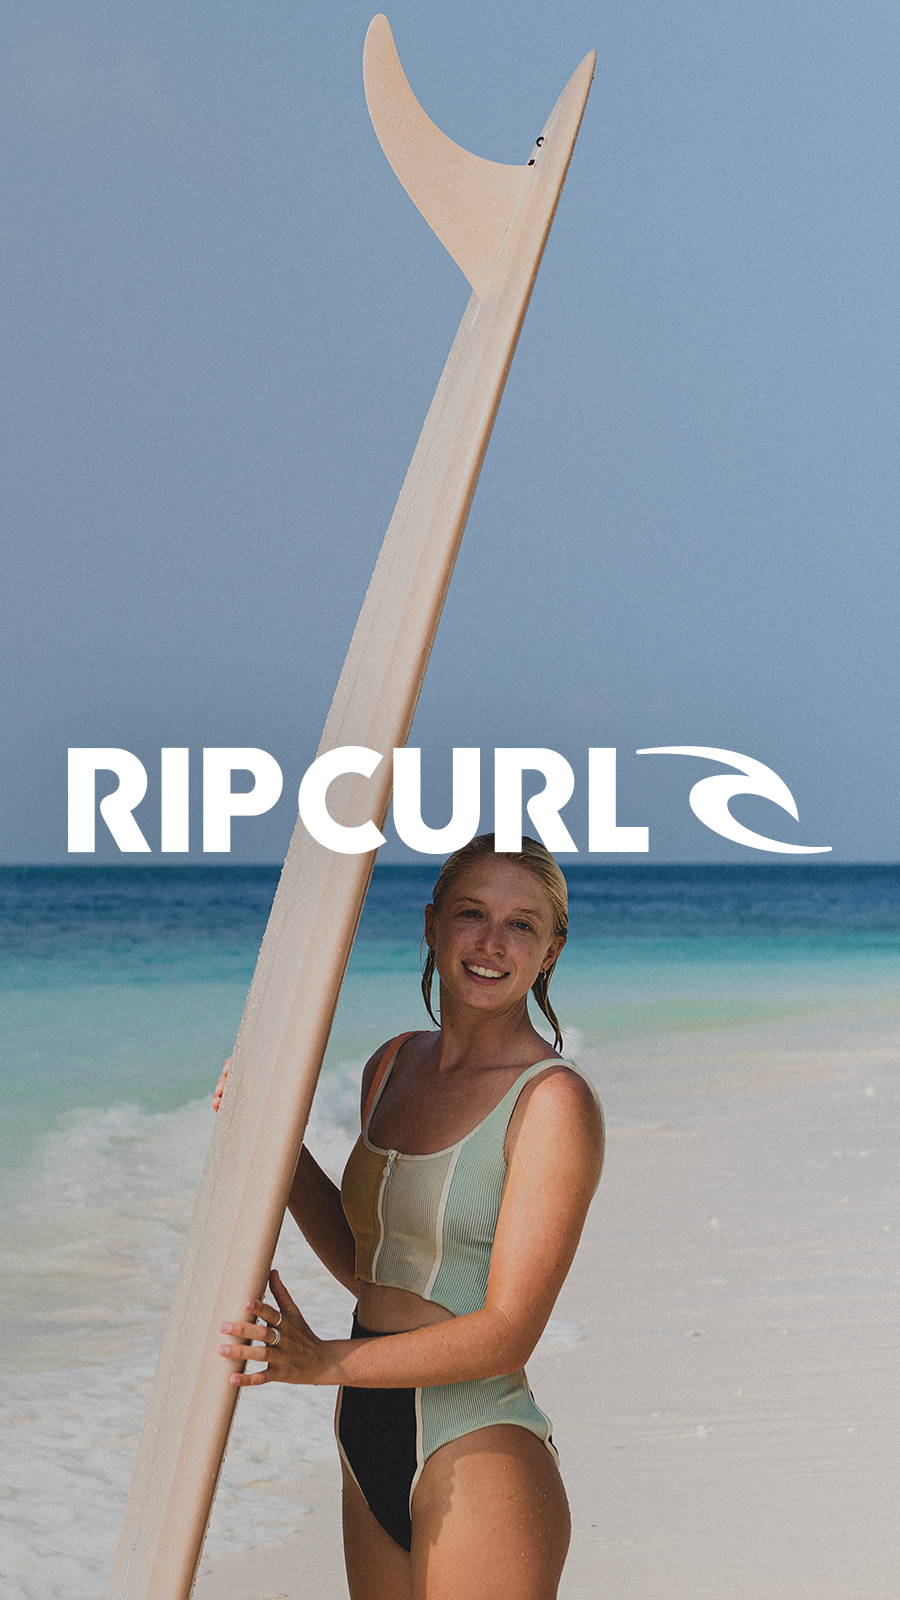 Young woman standing on bMagnetico in Rip Curl bathing suit holding up surf board